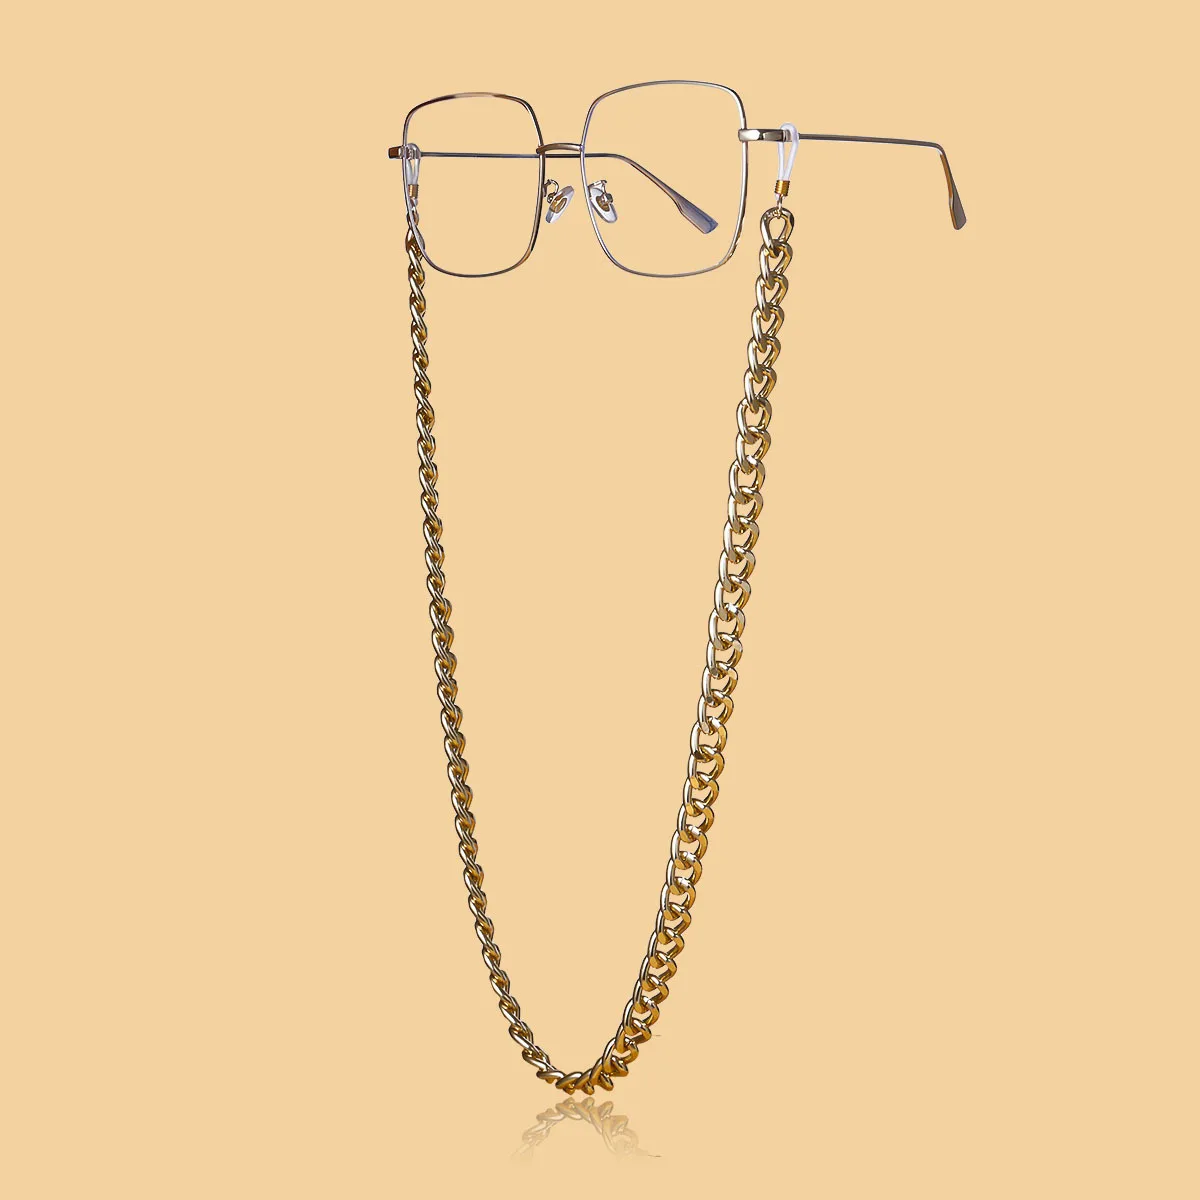 

2020 New Fashion Eye Glasses Sunglasses Spectacles Vintage Chain Holder Cord Lanyard Necklace Gold Silver Eyeglass Chain Holder, As photo